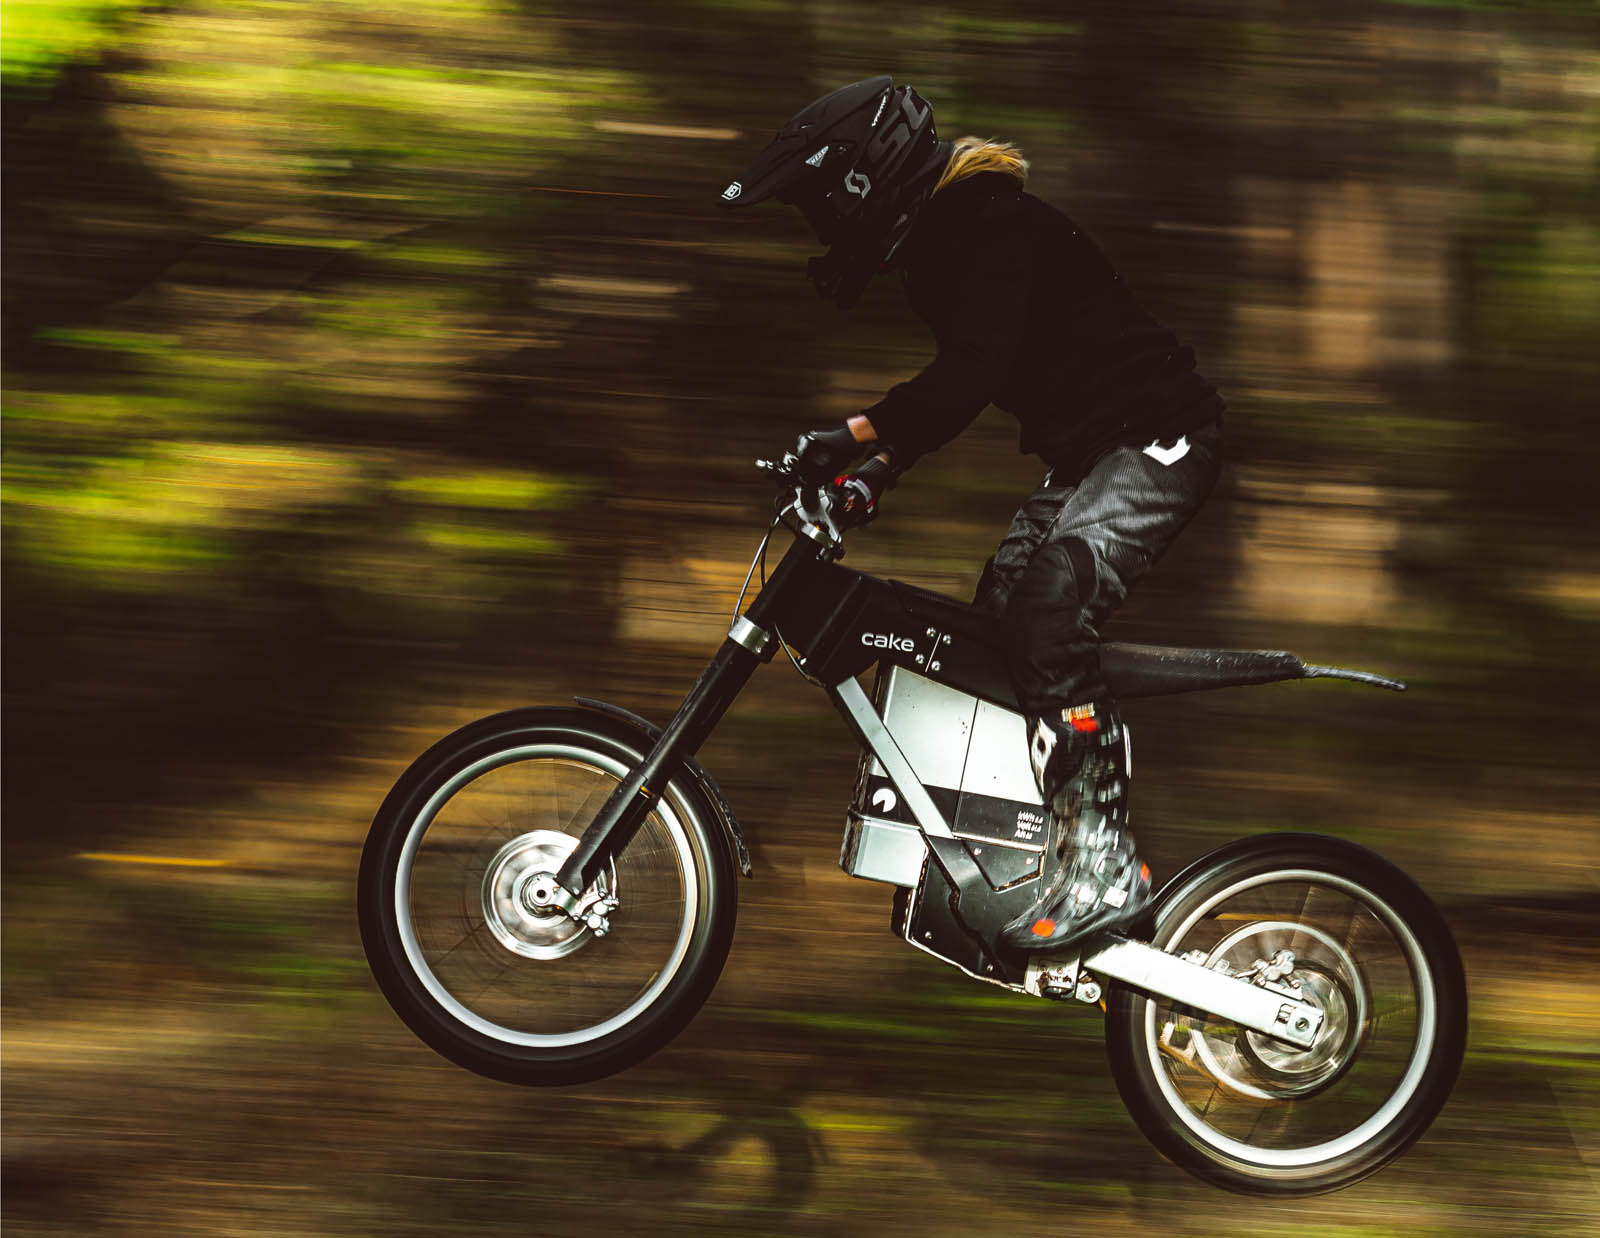 First look: Off-road electric motorcycle or e-bike? CAKE blur the lines